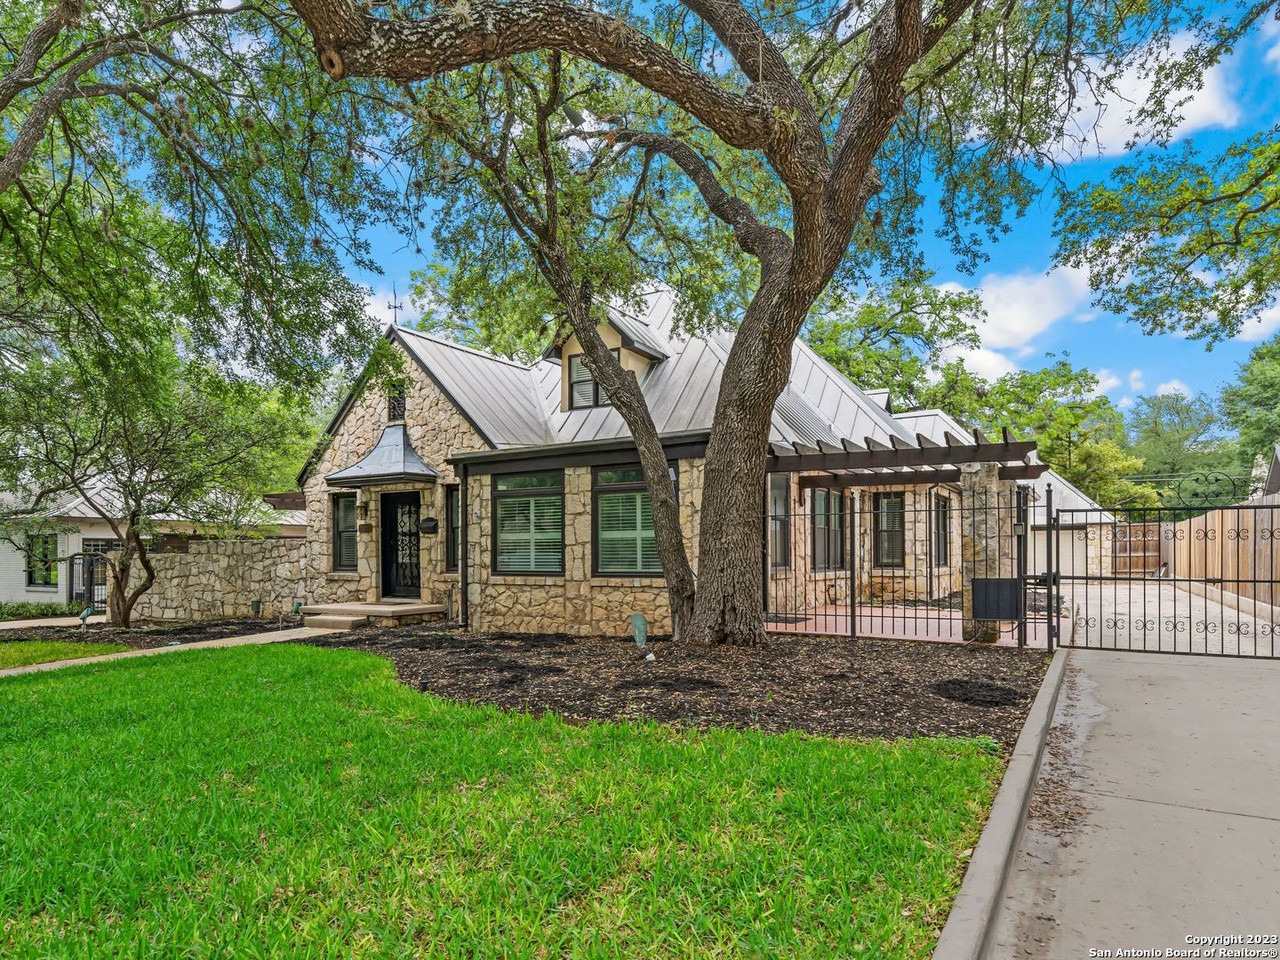 A 1926 stone home built by the developer of San Antonio's Olmos Park is on the market